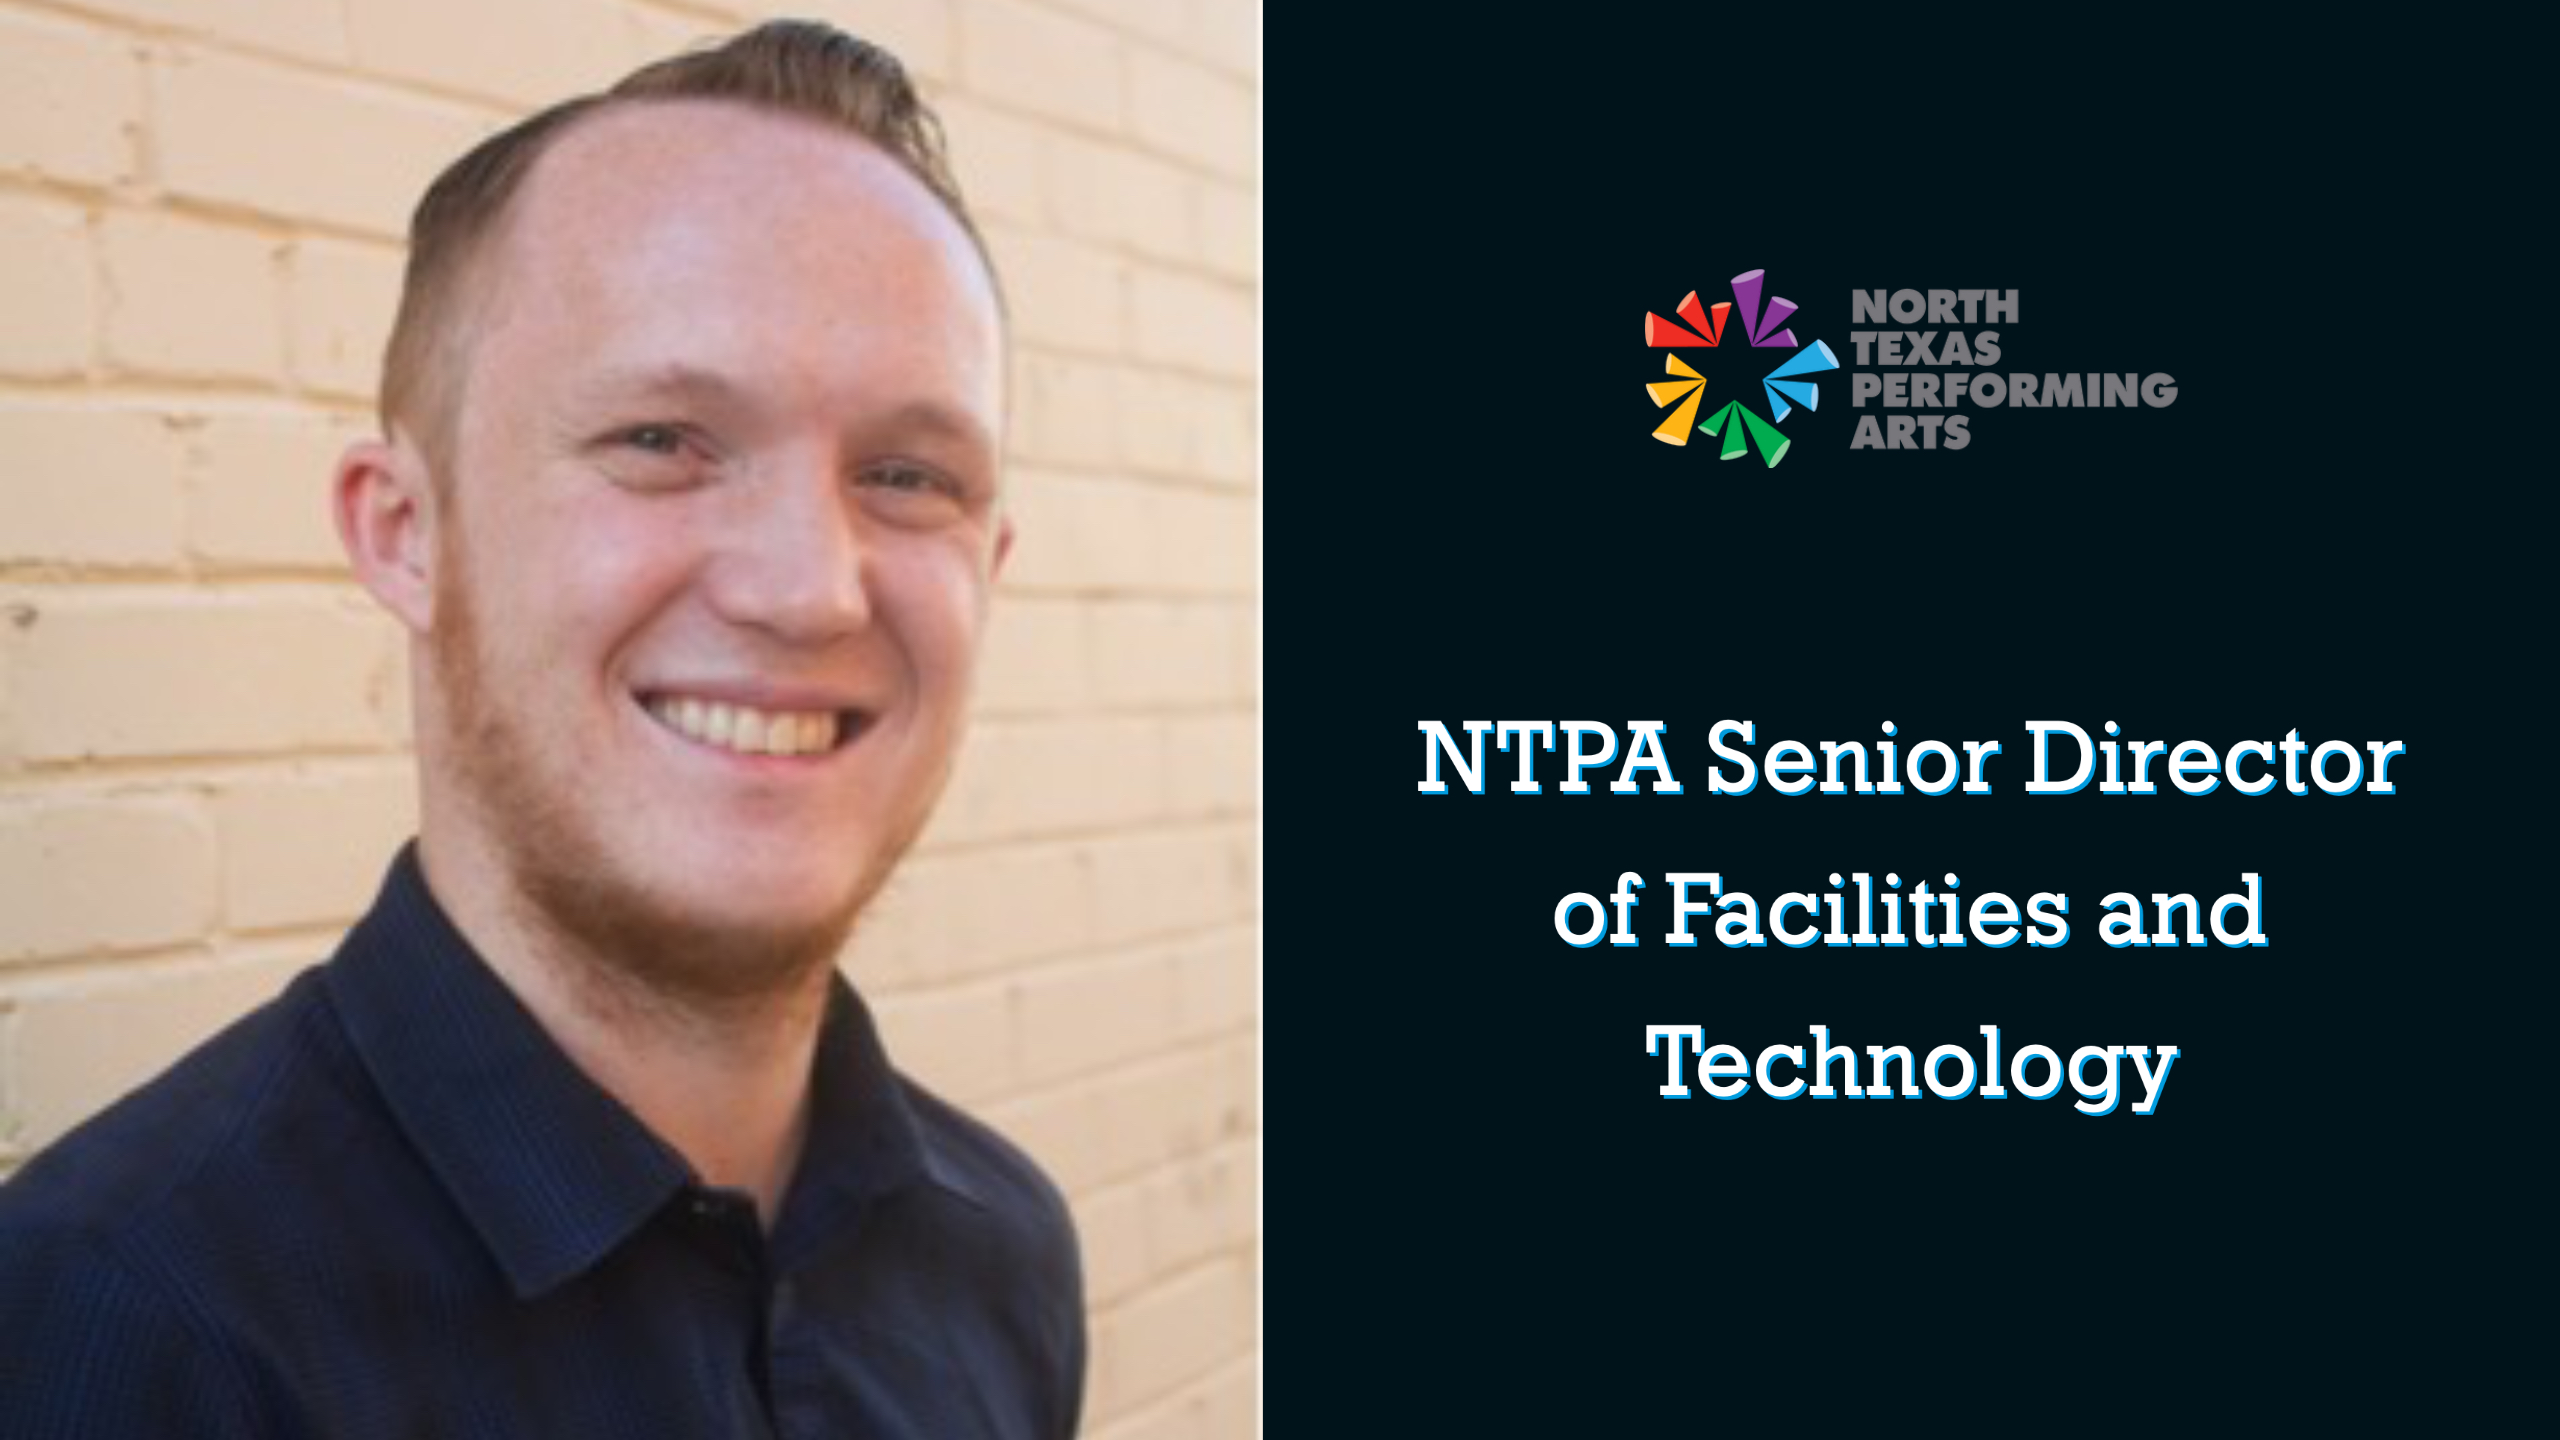 Announcing Christian White as NTPA Senior Director of Facilities and Technology